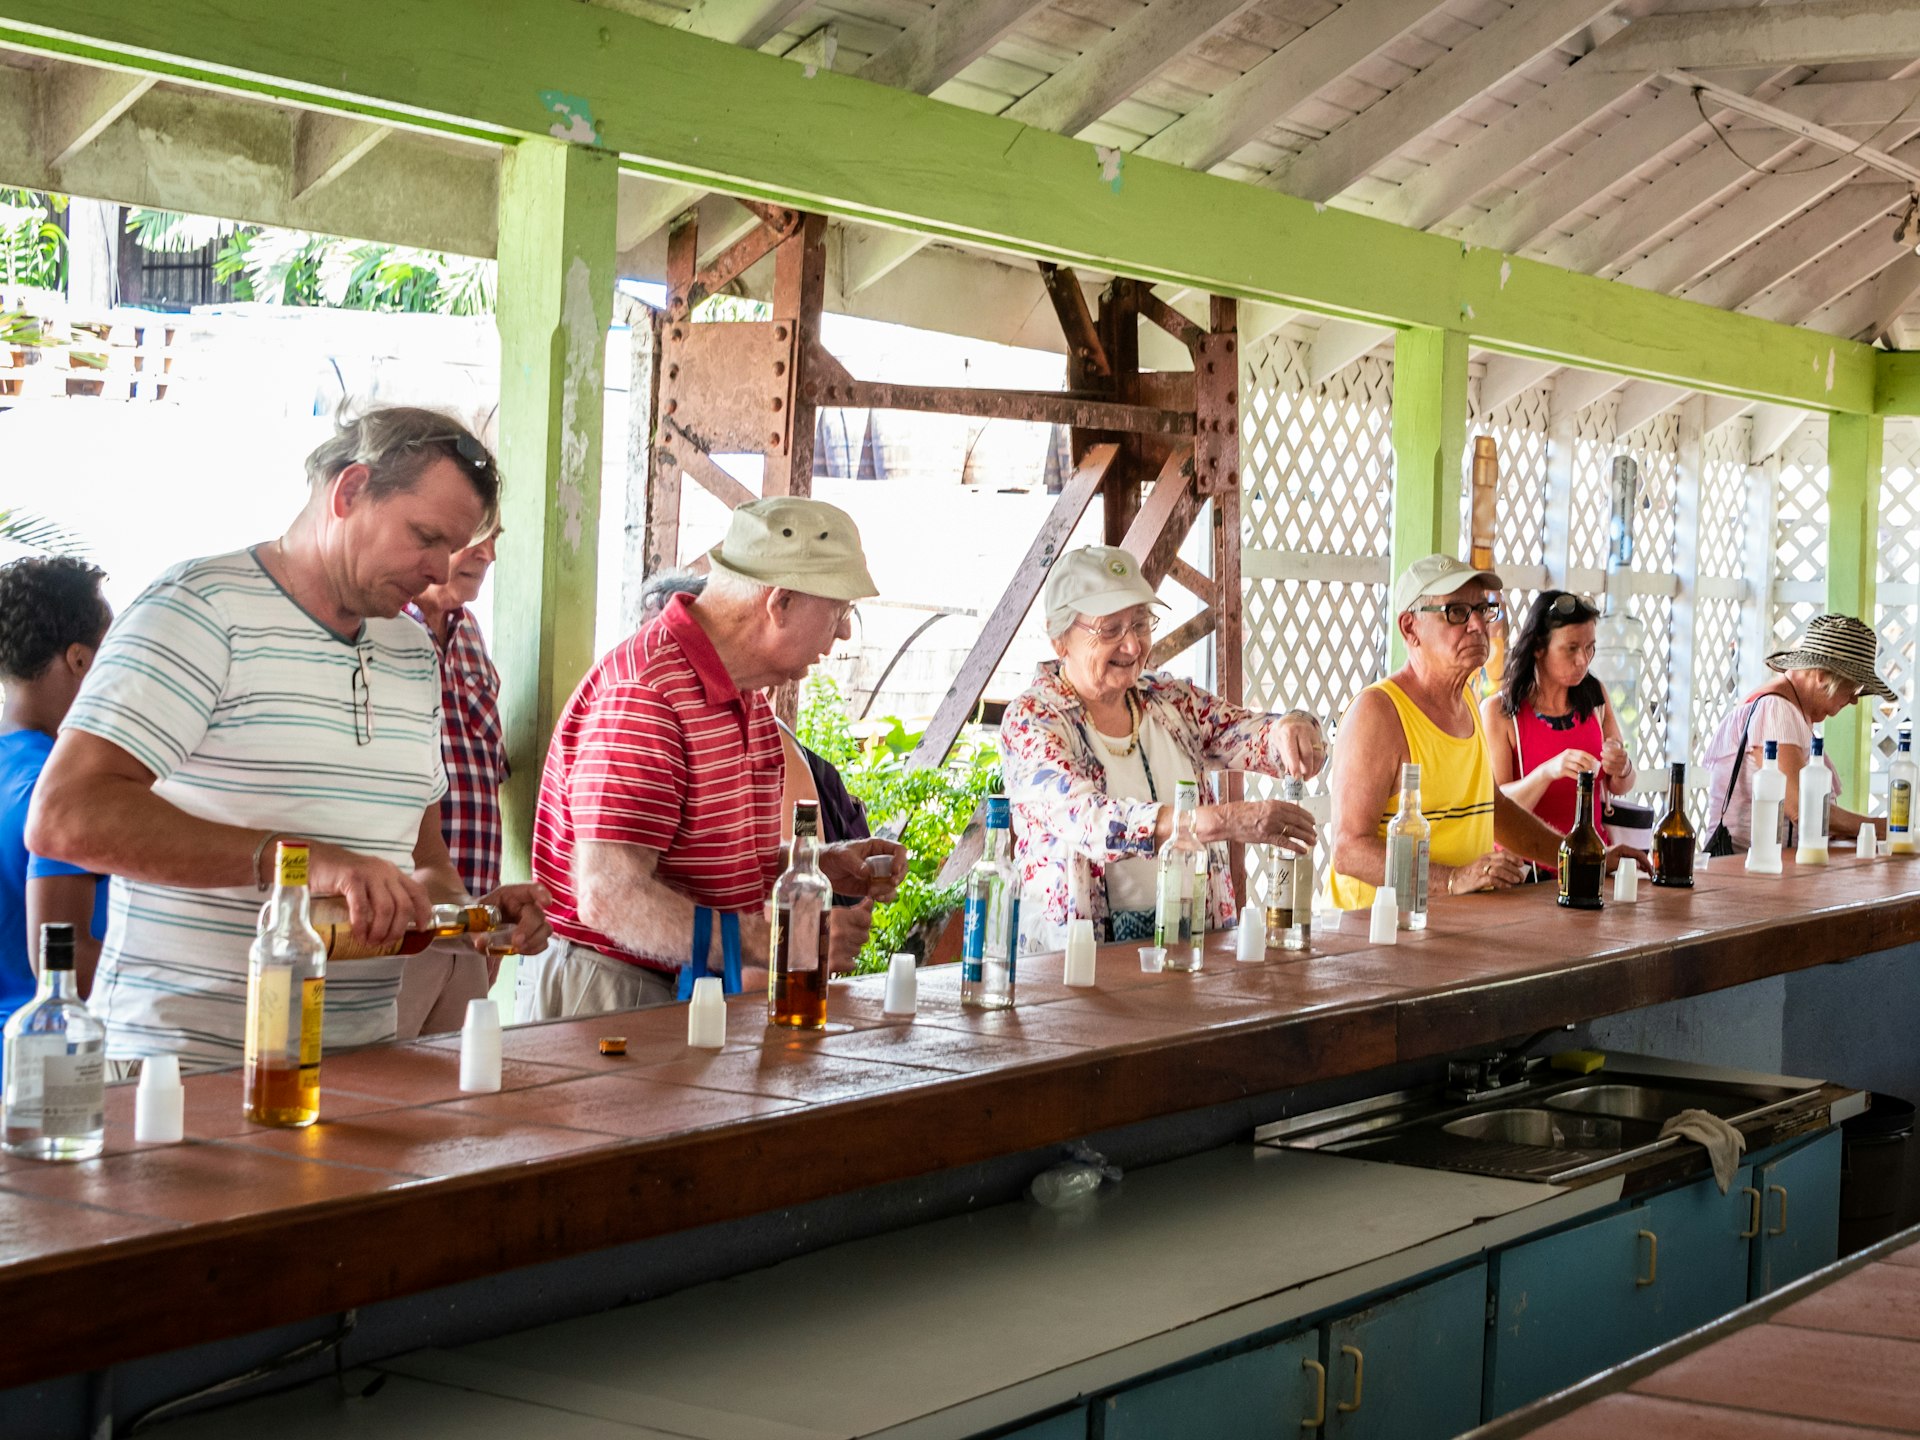 Tourists sampling rums at a bar at St Lucia Distillers